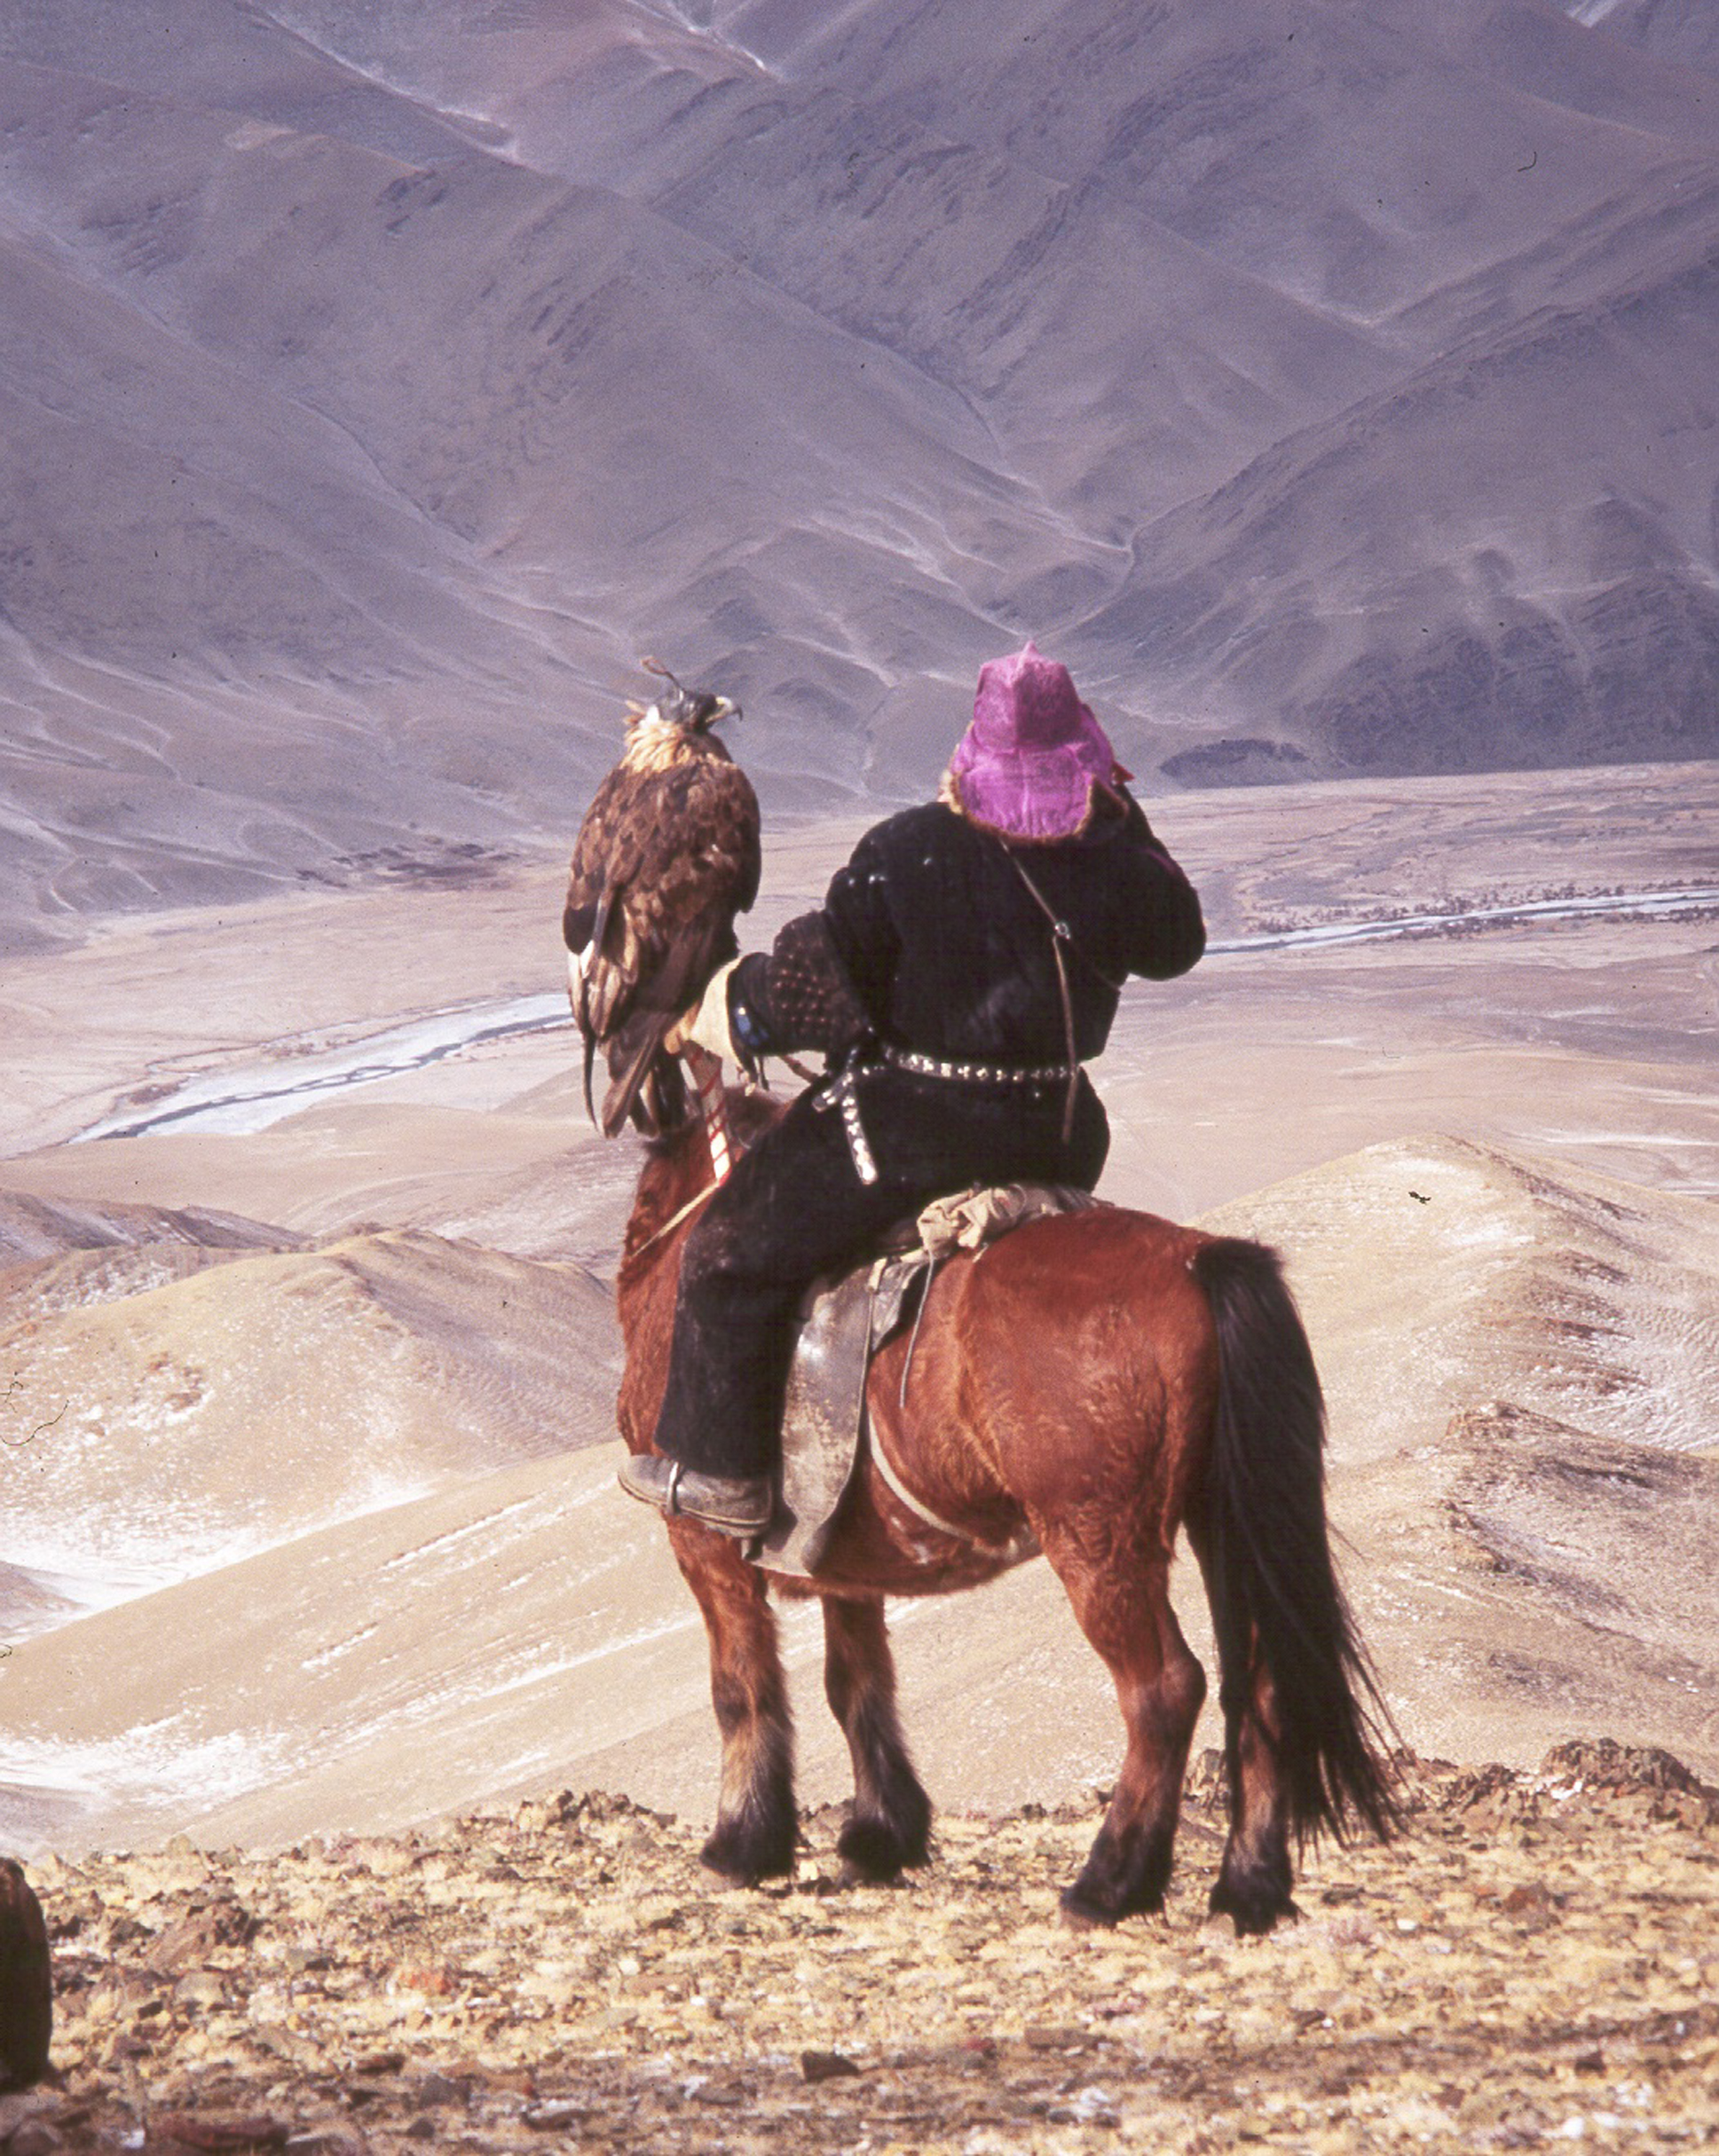 A Mongolian falconer on horseback surveys the landscape with a Golden Eagle perched on his arm